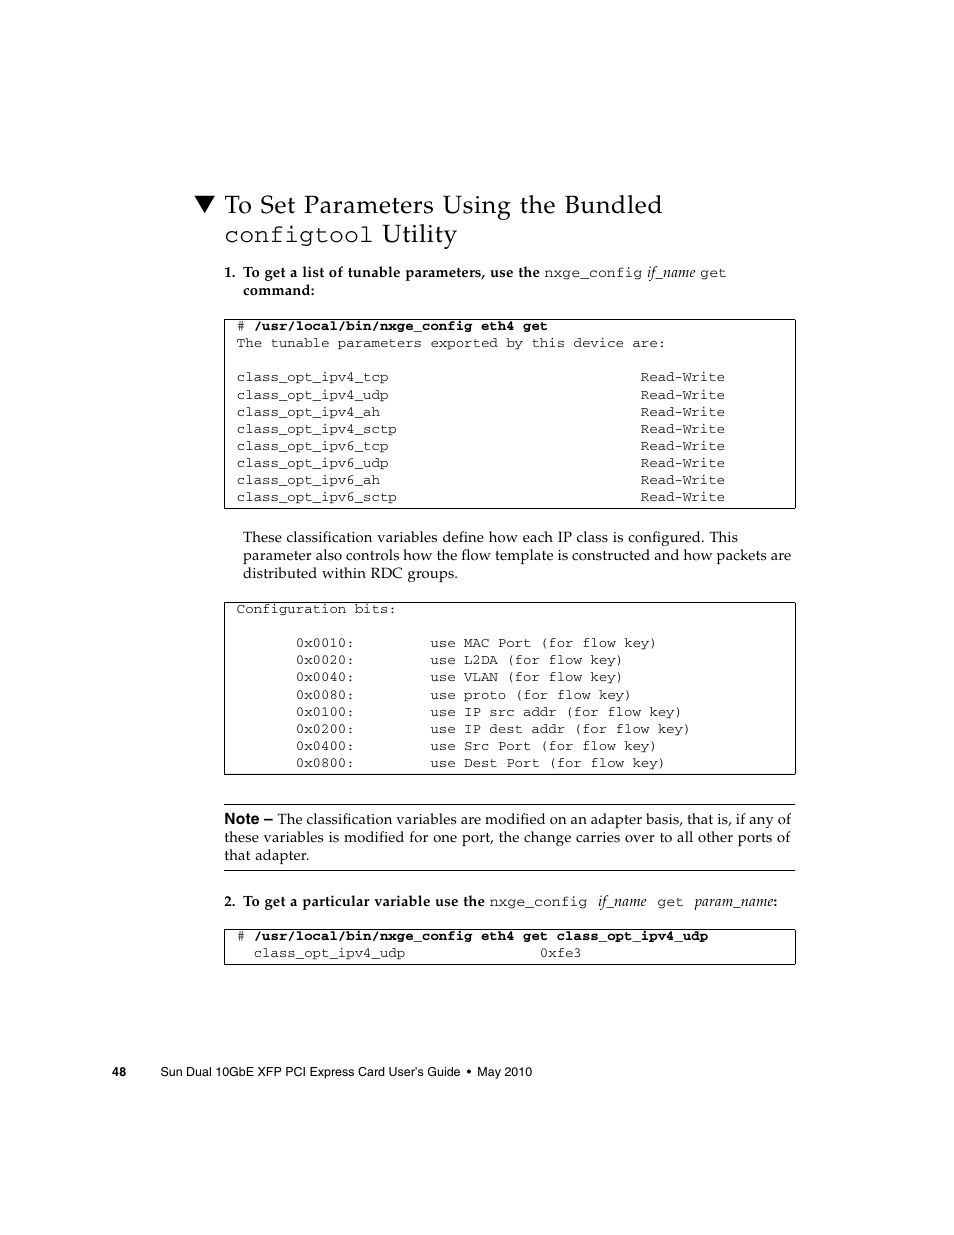 To set parameters using the bundled | Oracle Audio Technologies Sun Oracle SunDual 10GbE XFP User Manual | Page 58 / 86